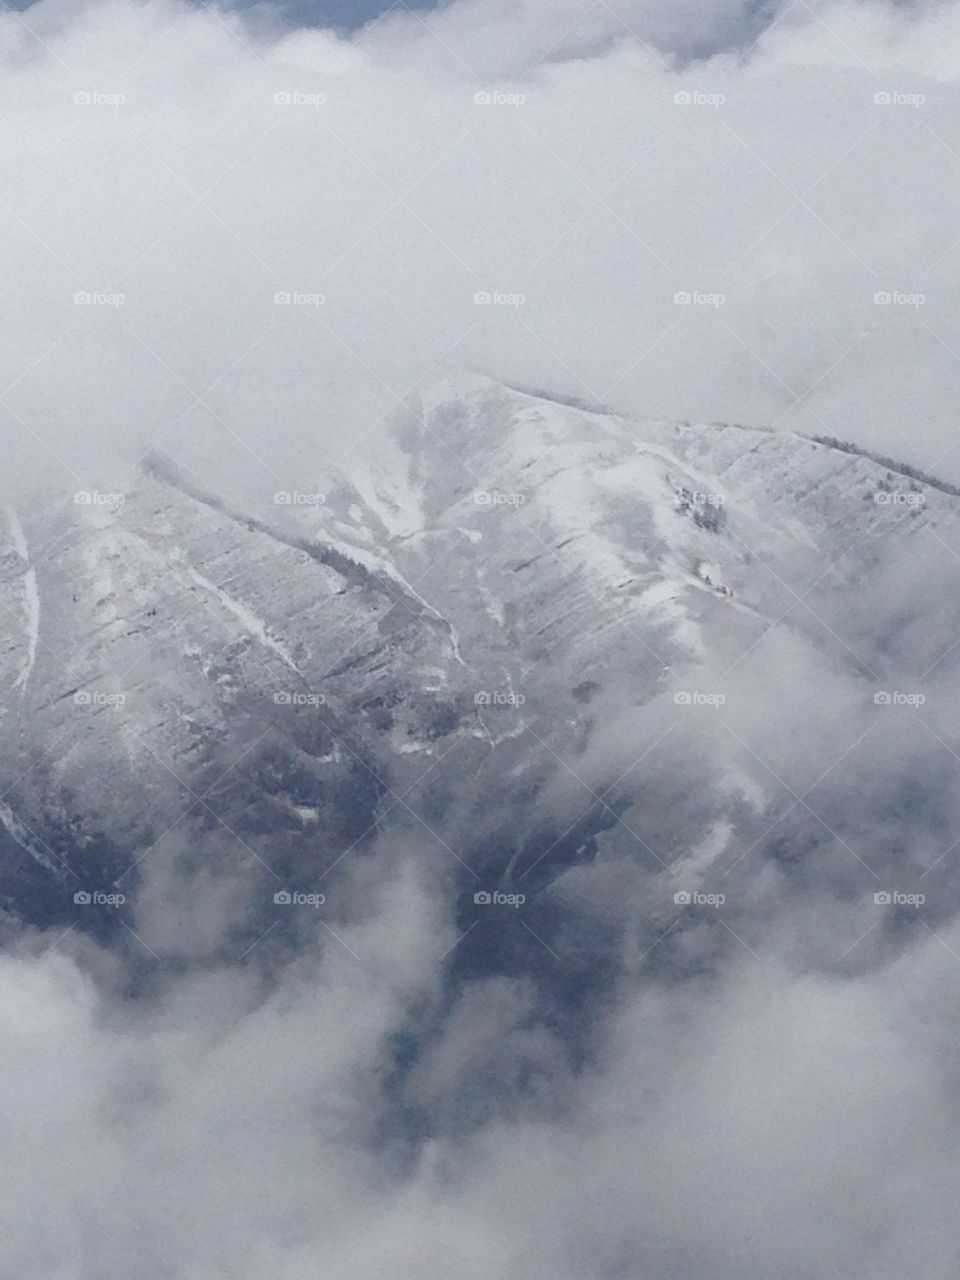 Snow caps. Snow on Utah mountains from above